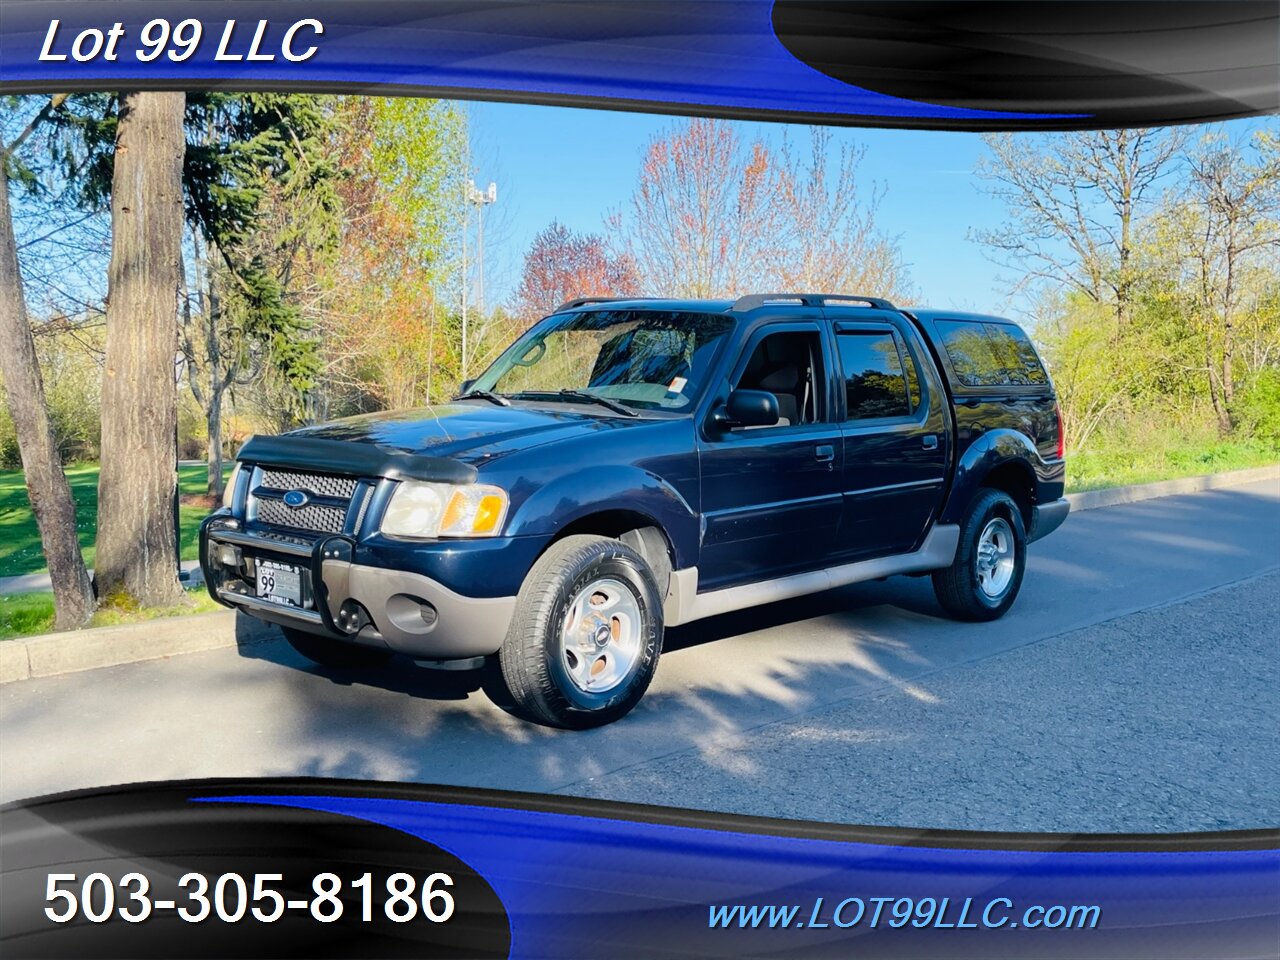 2003 Ford Explorer Sport Trac XLS 4x4  1-OWNER 117k  NEW TIRES  Canopy   - Photo 2 - Milwaukie, OR 97267